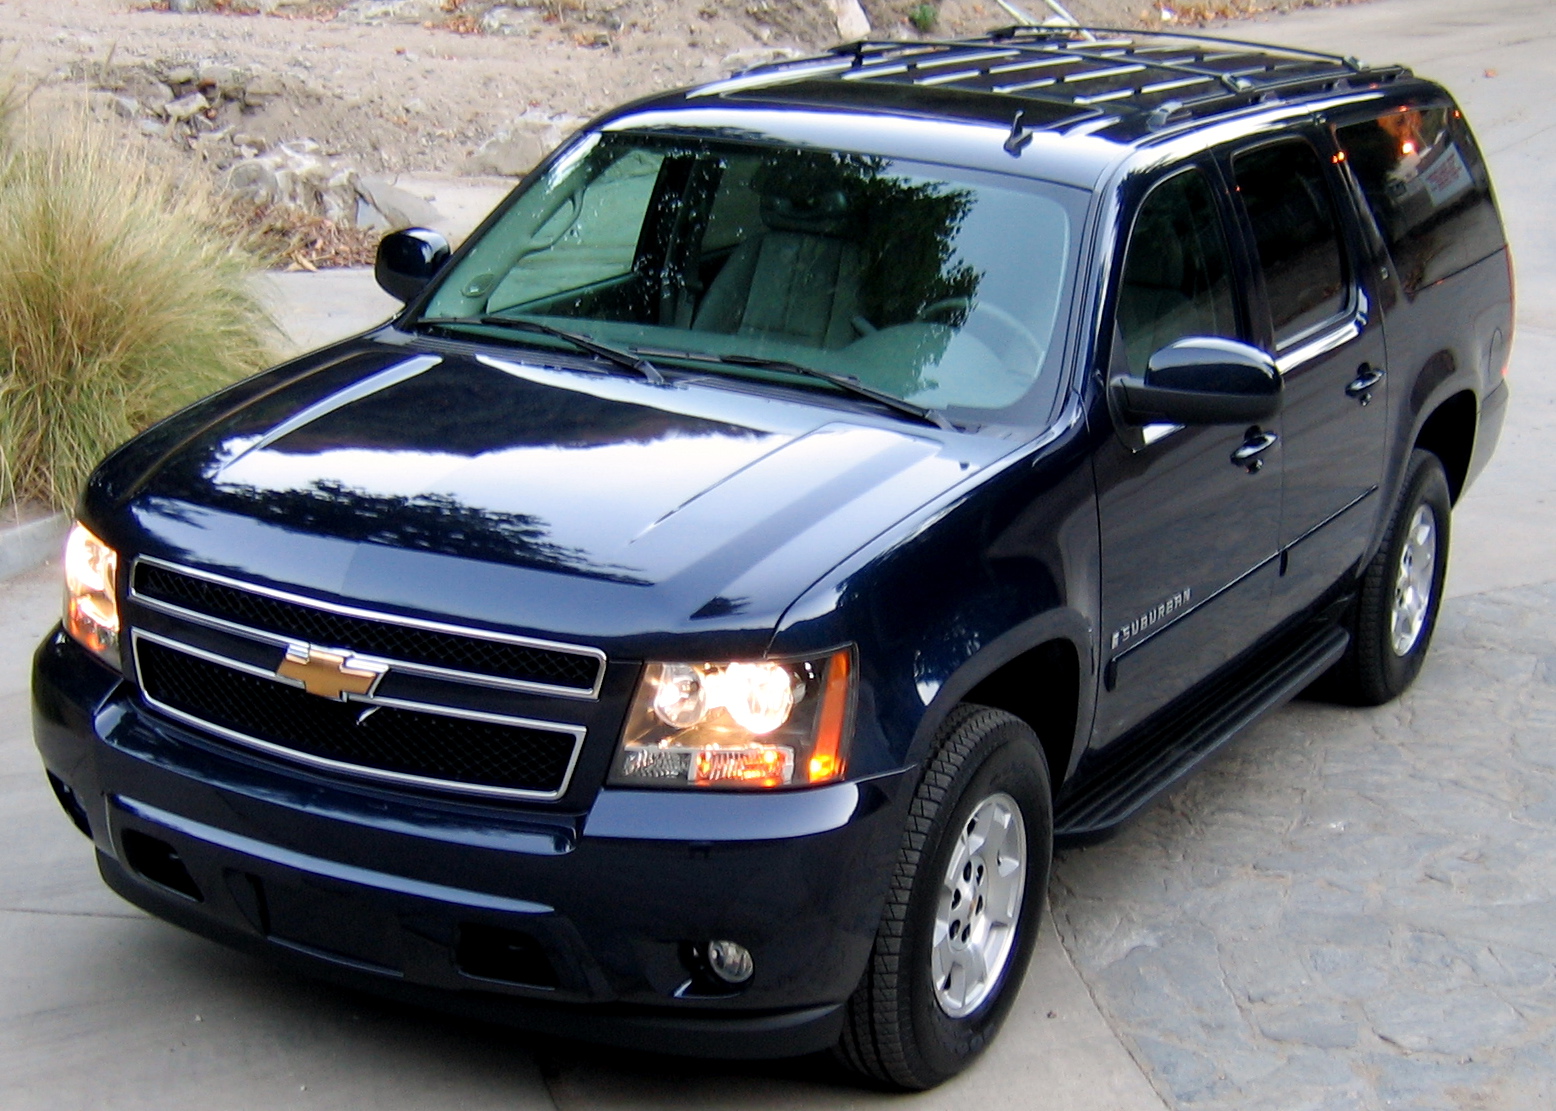 Chevrolet Suburban 2013: Review, Amazing Pictures and Images – Look at